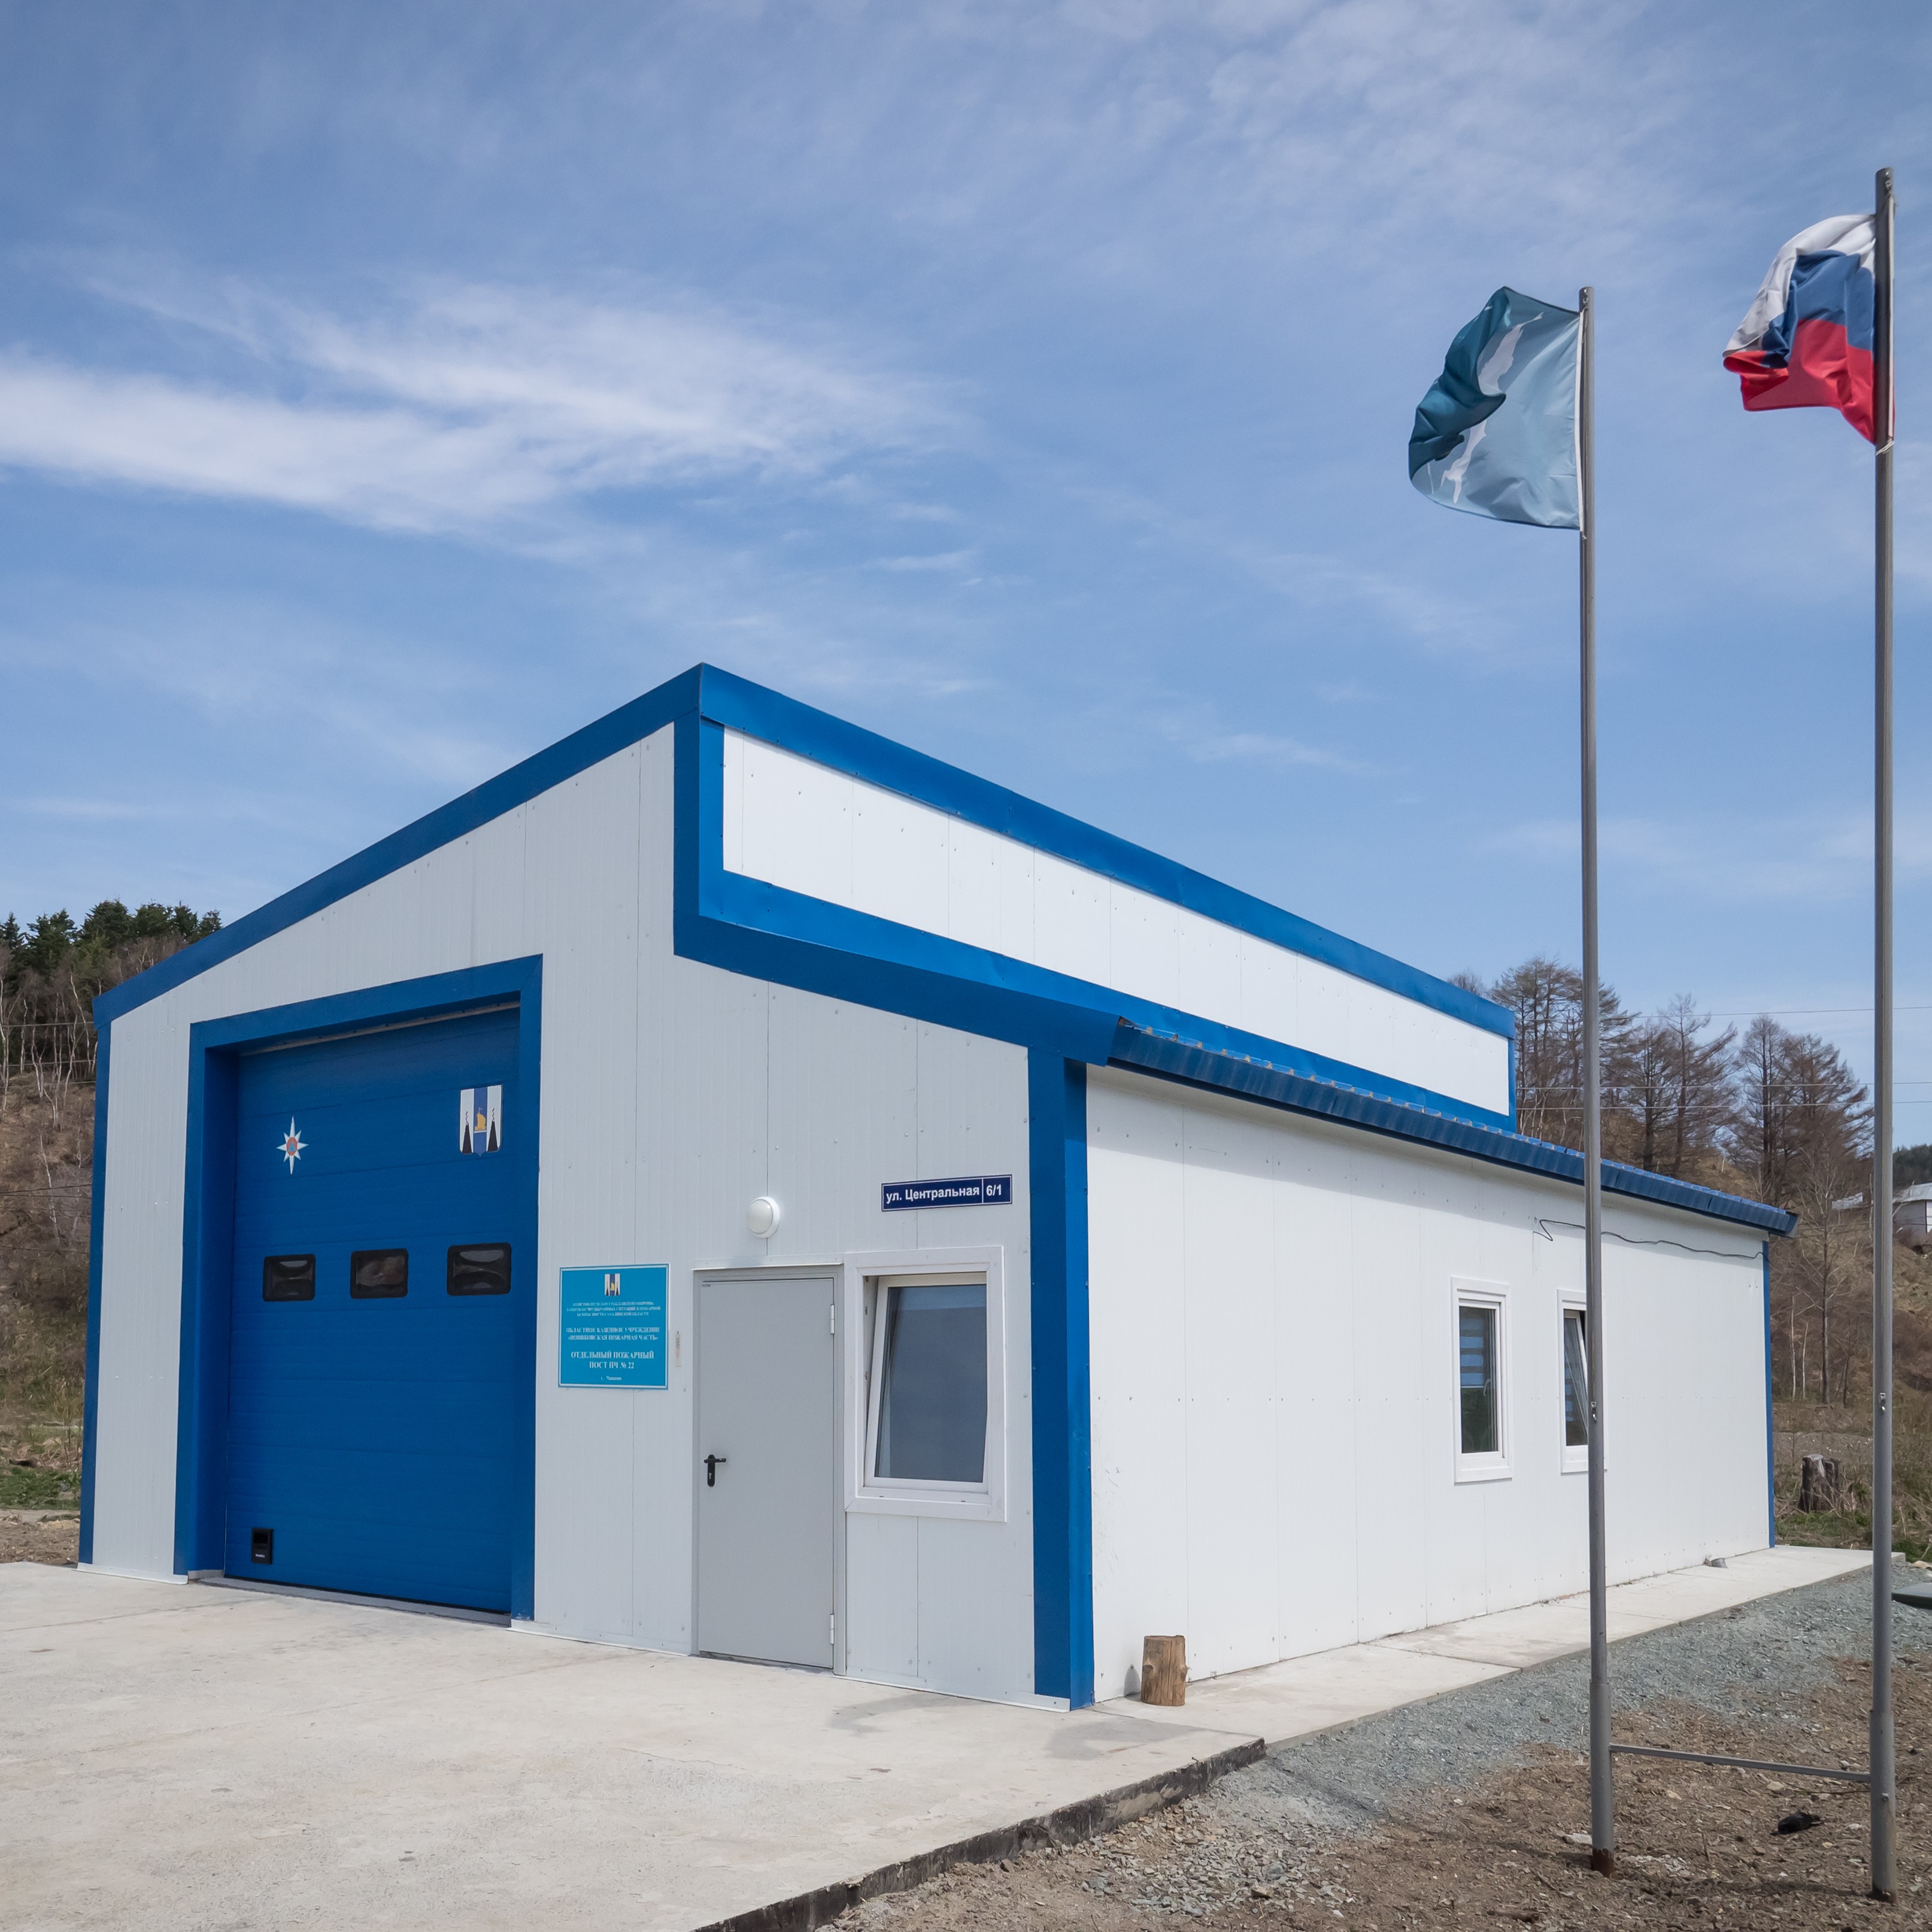 Prefabricated fire stations for one and two vehicle units.